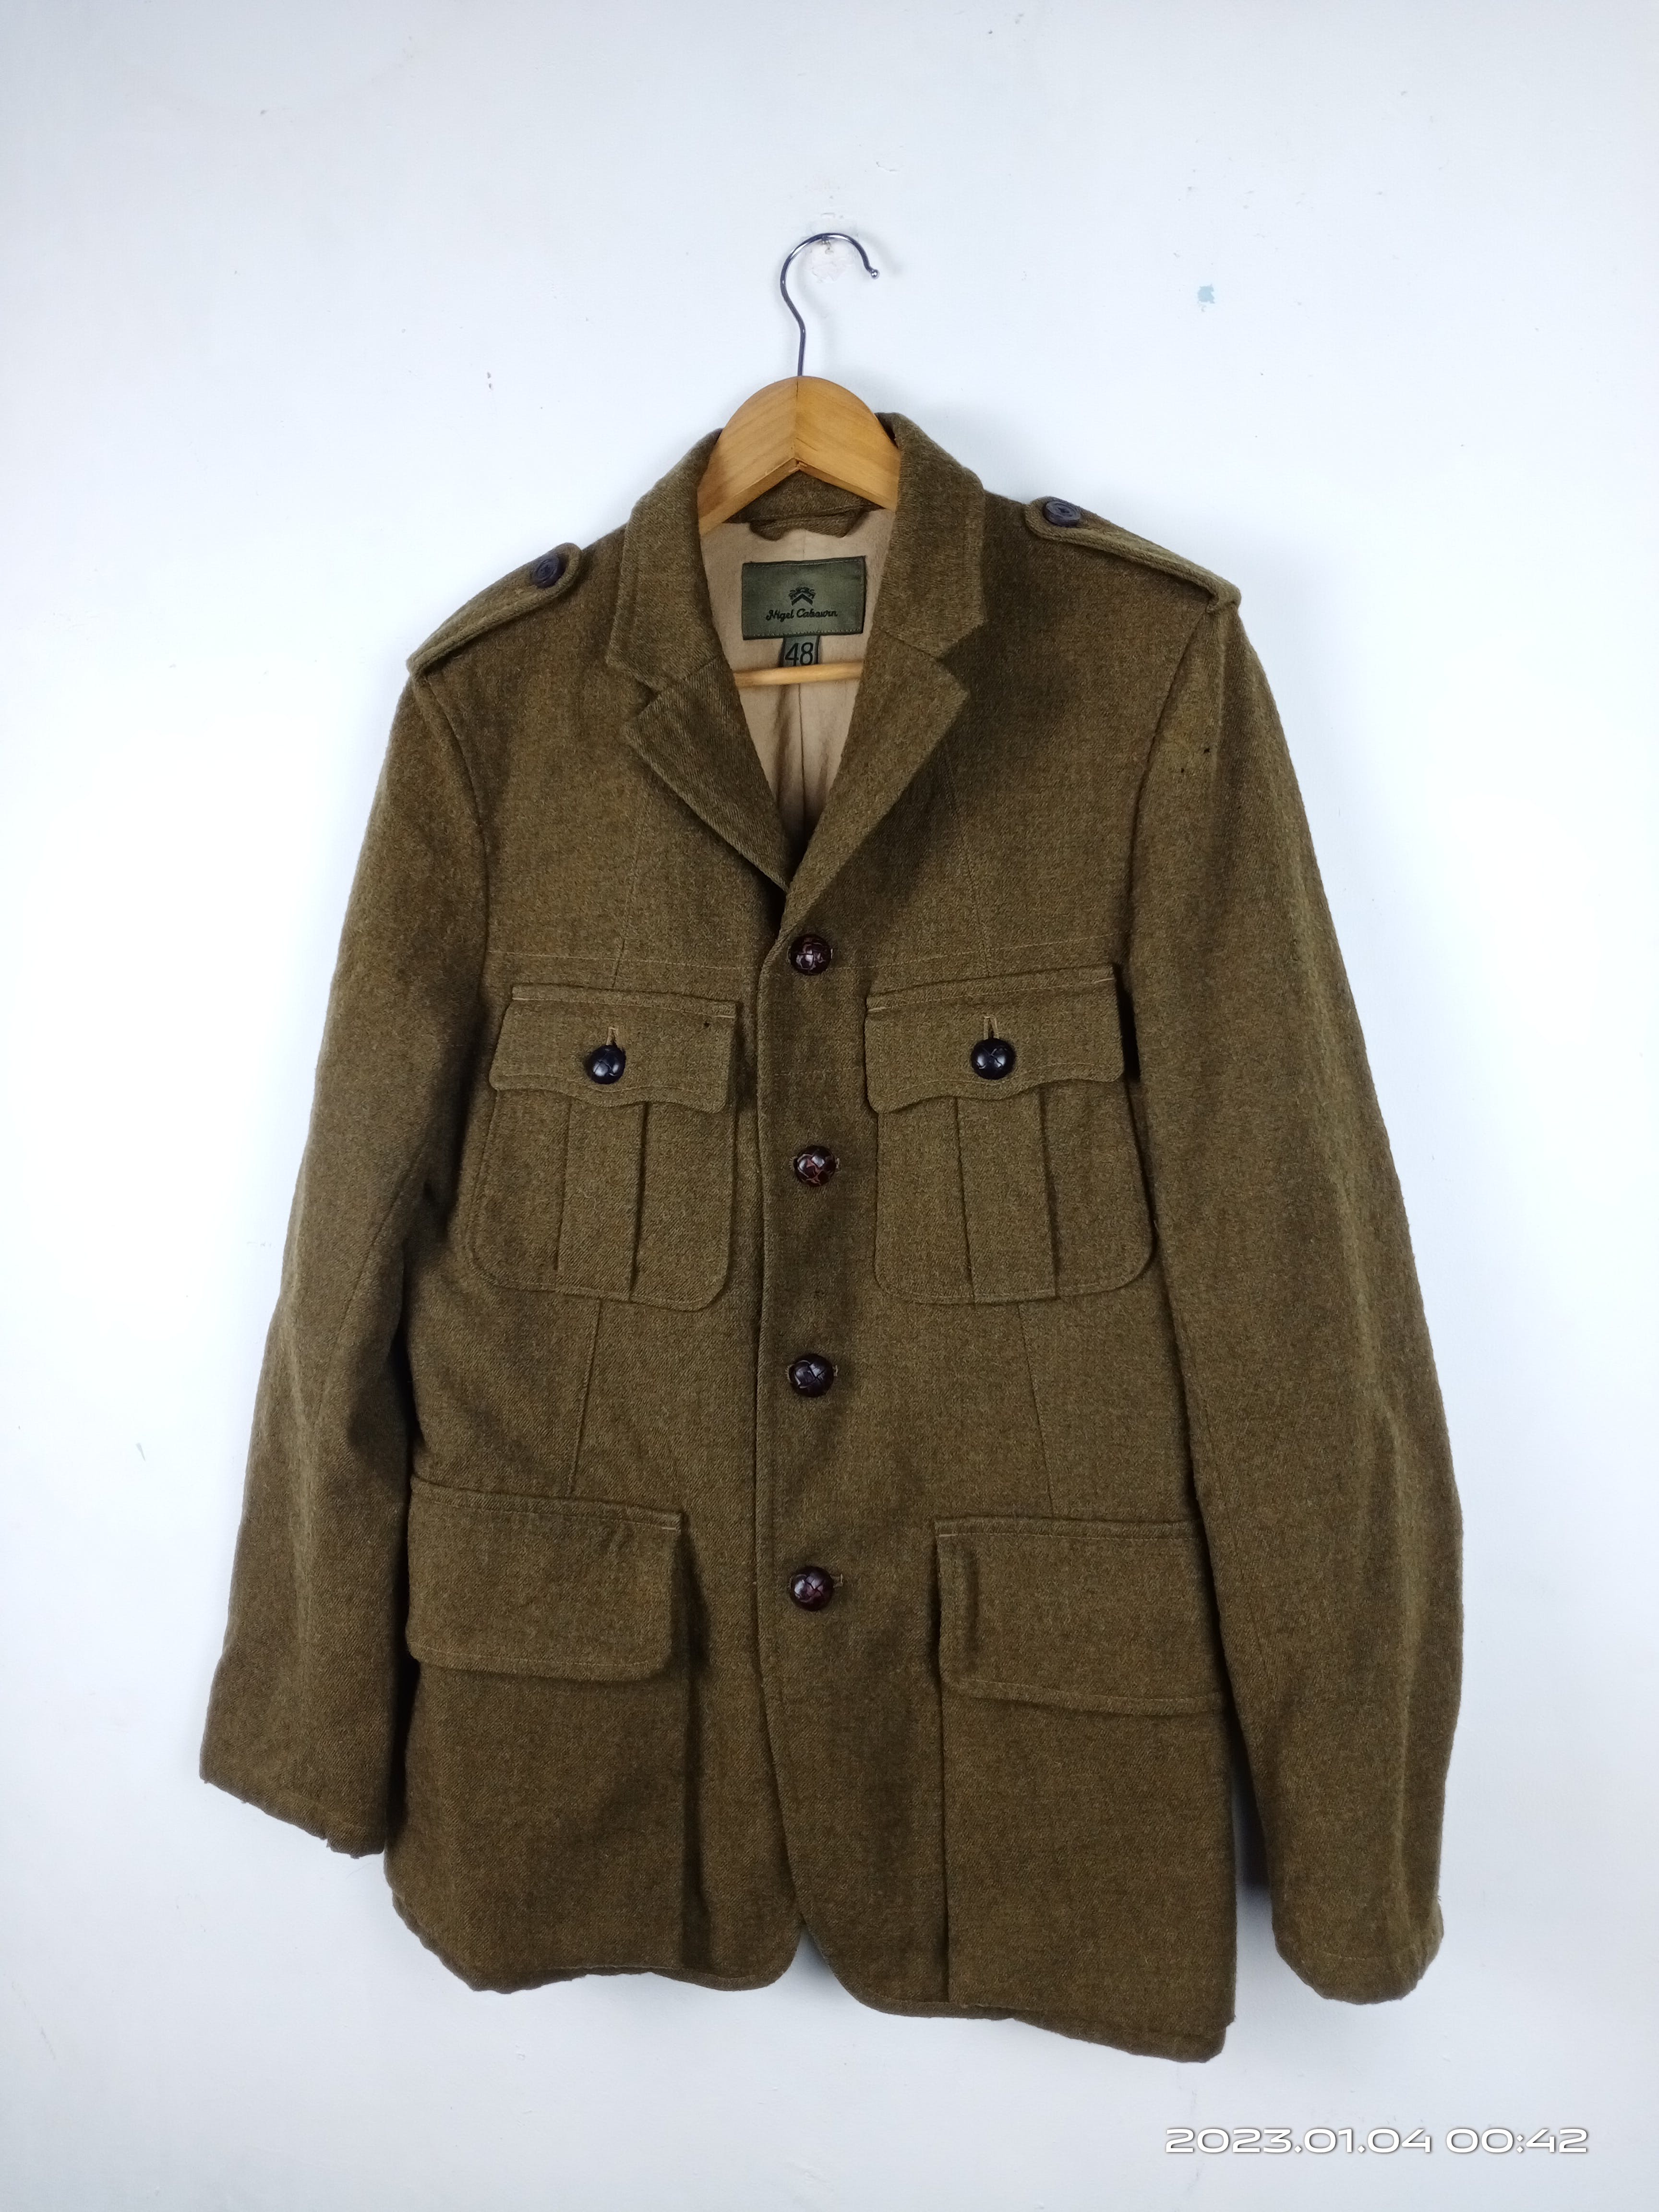 💥RARE💥Vintage Nigel Cabourn Wool Military Style Jacket - 3